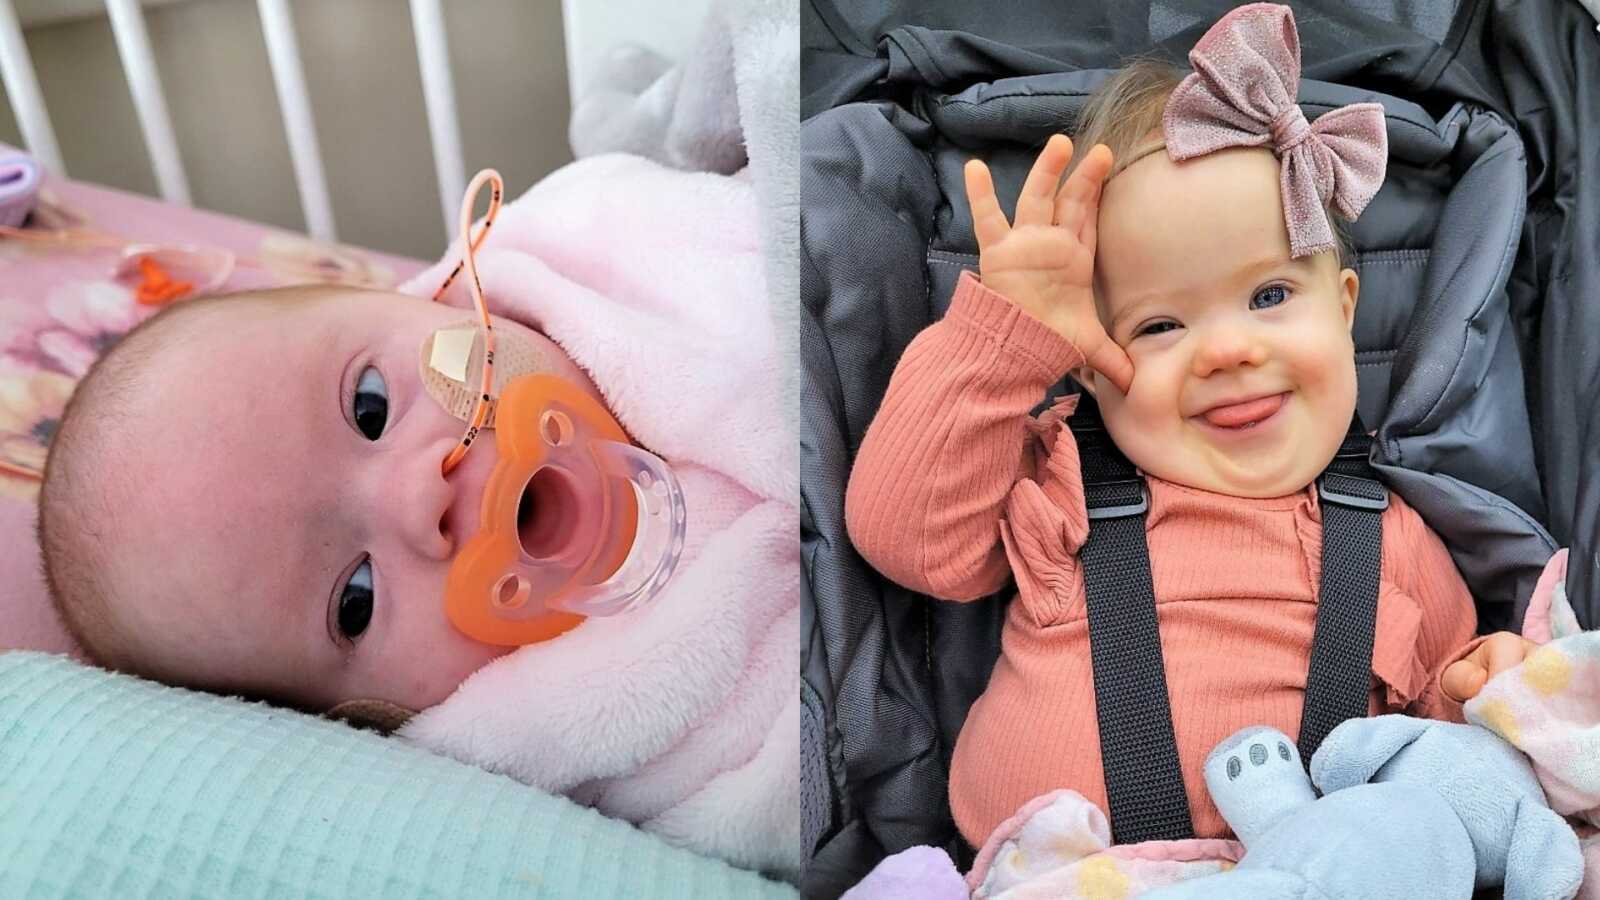 Mom shares photos of daughter born with Down Syndrome